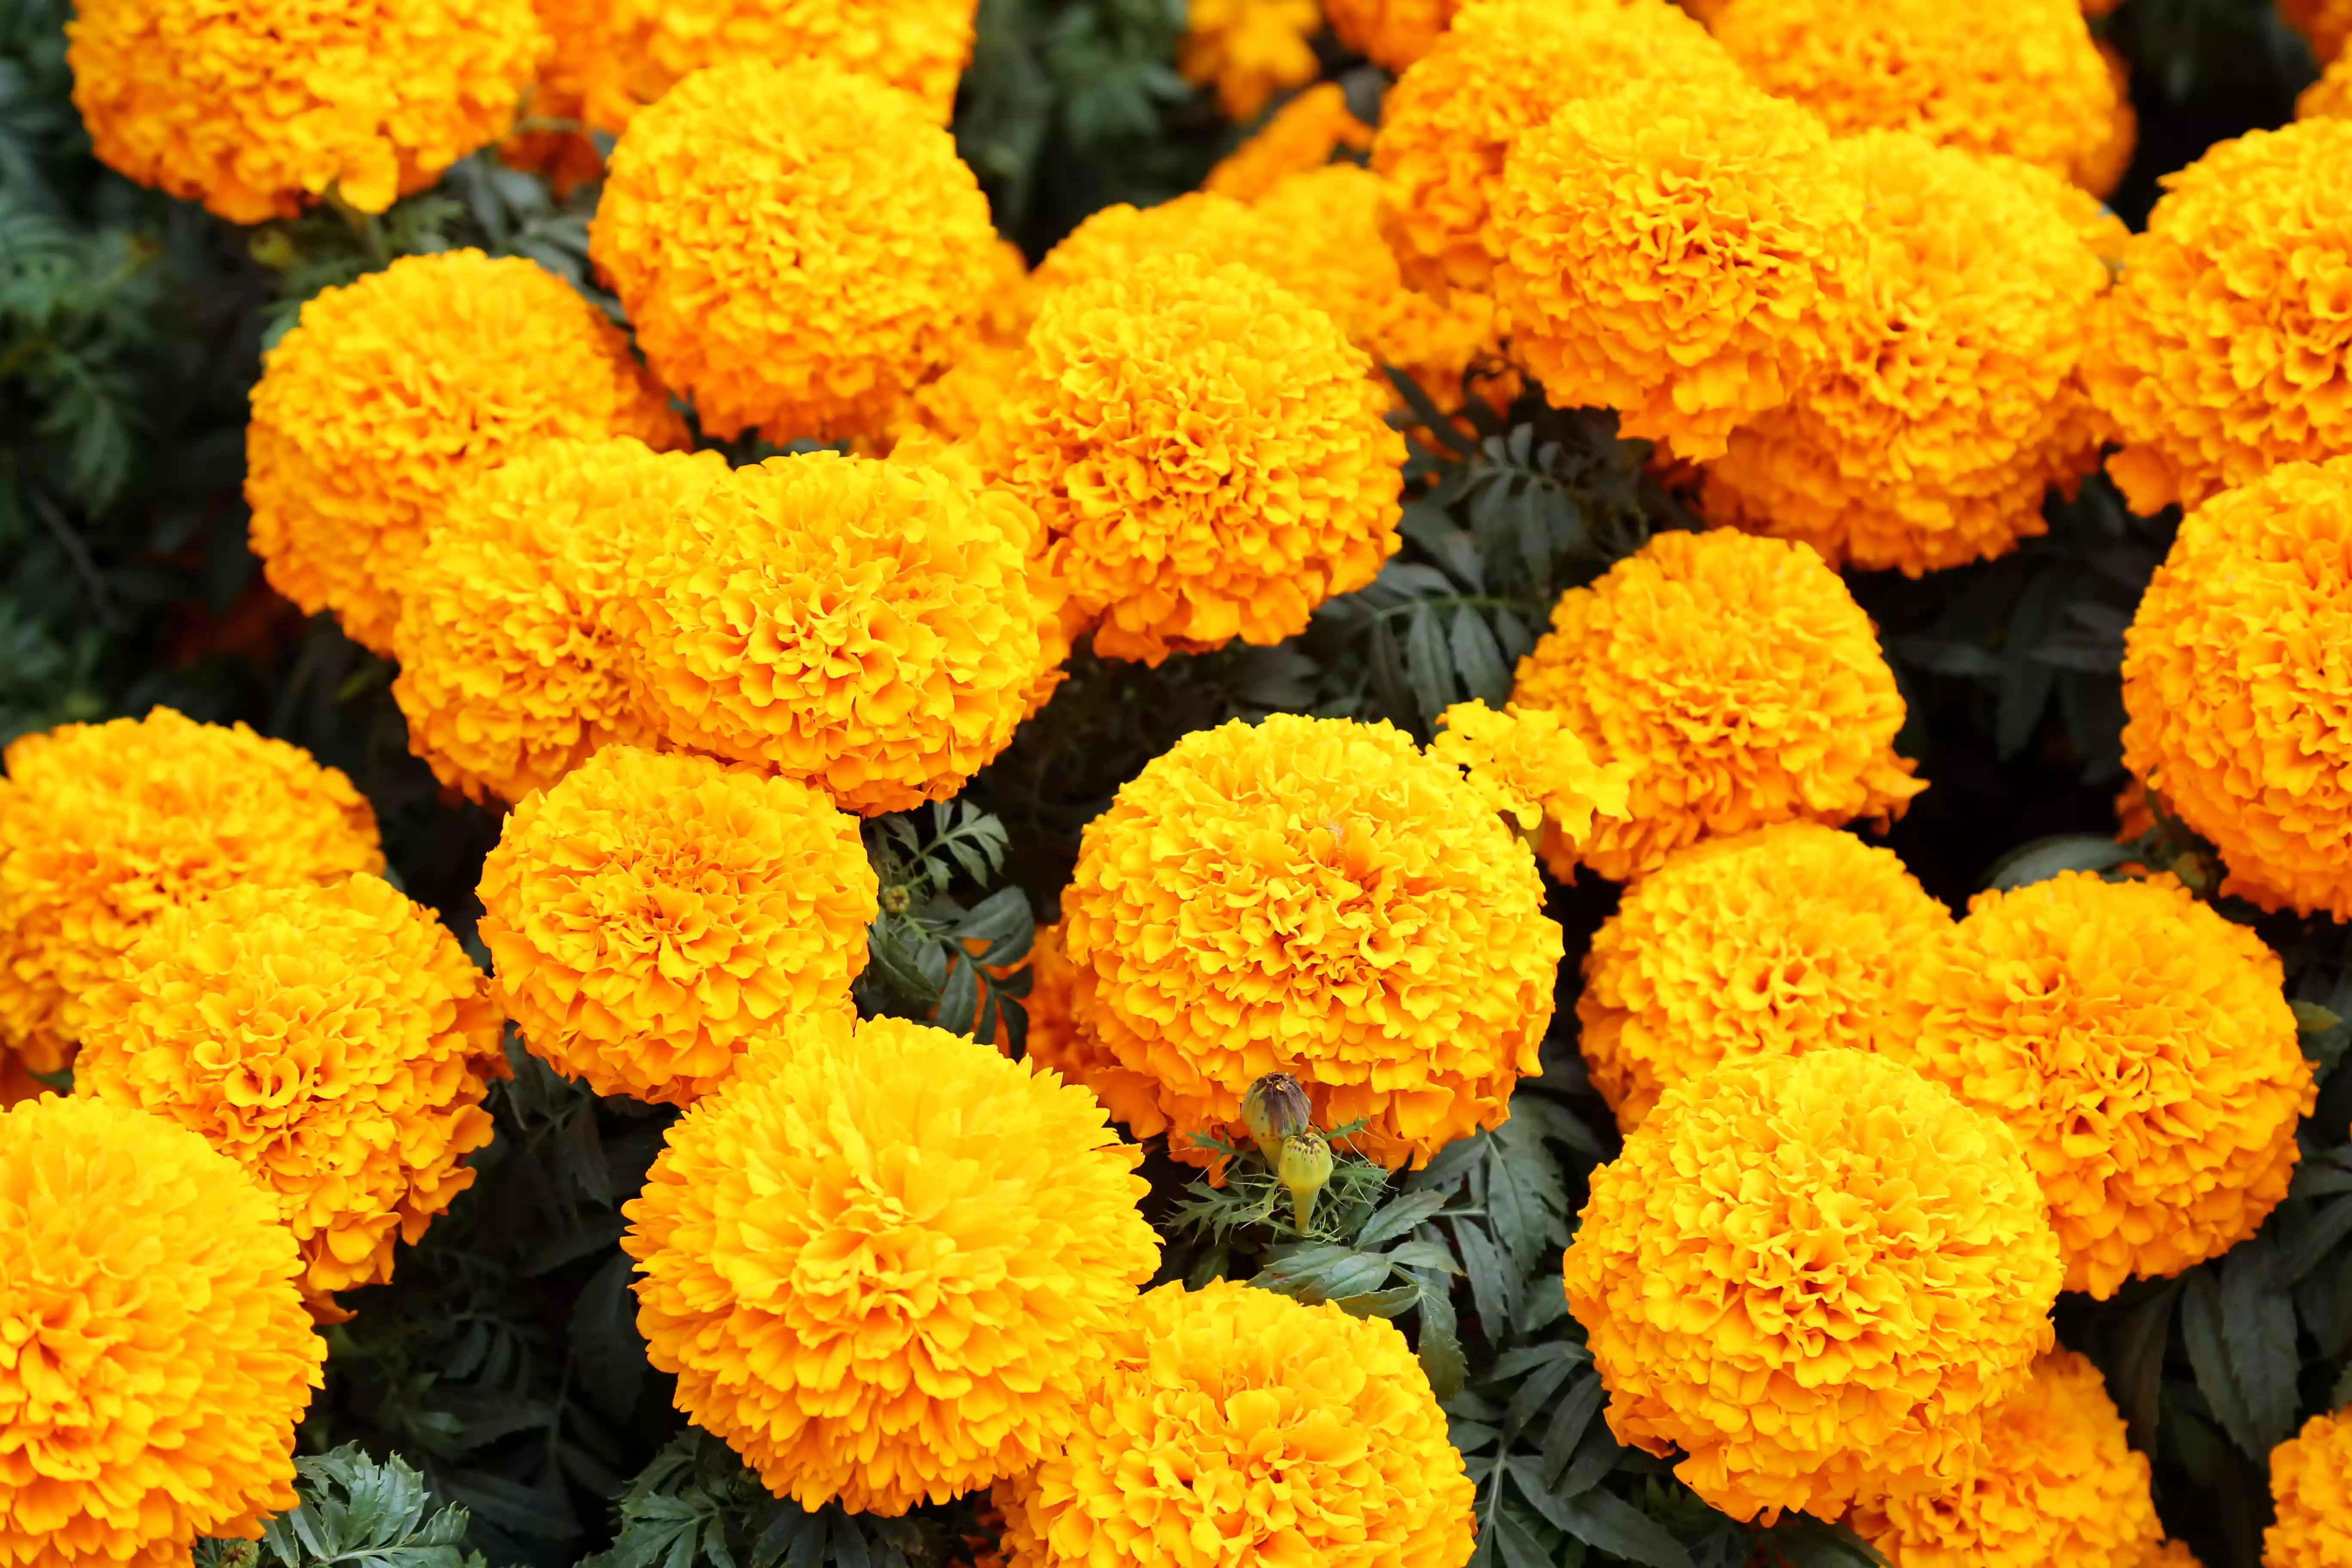 Close-up of a field of yellow marigolds